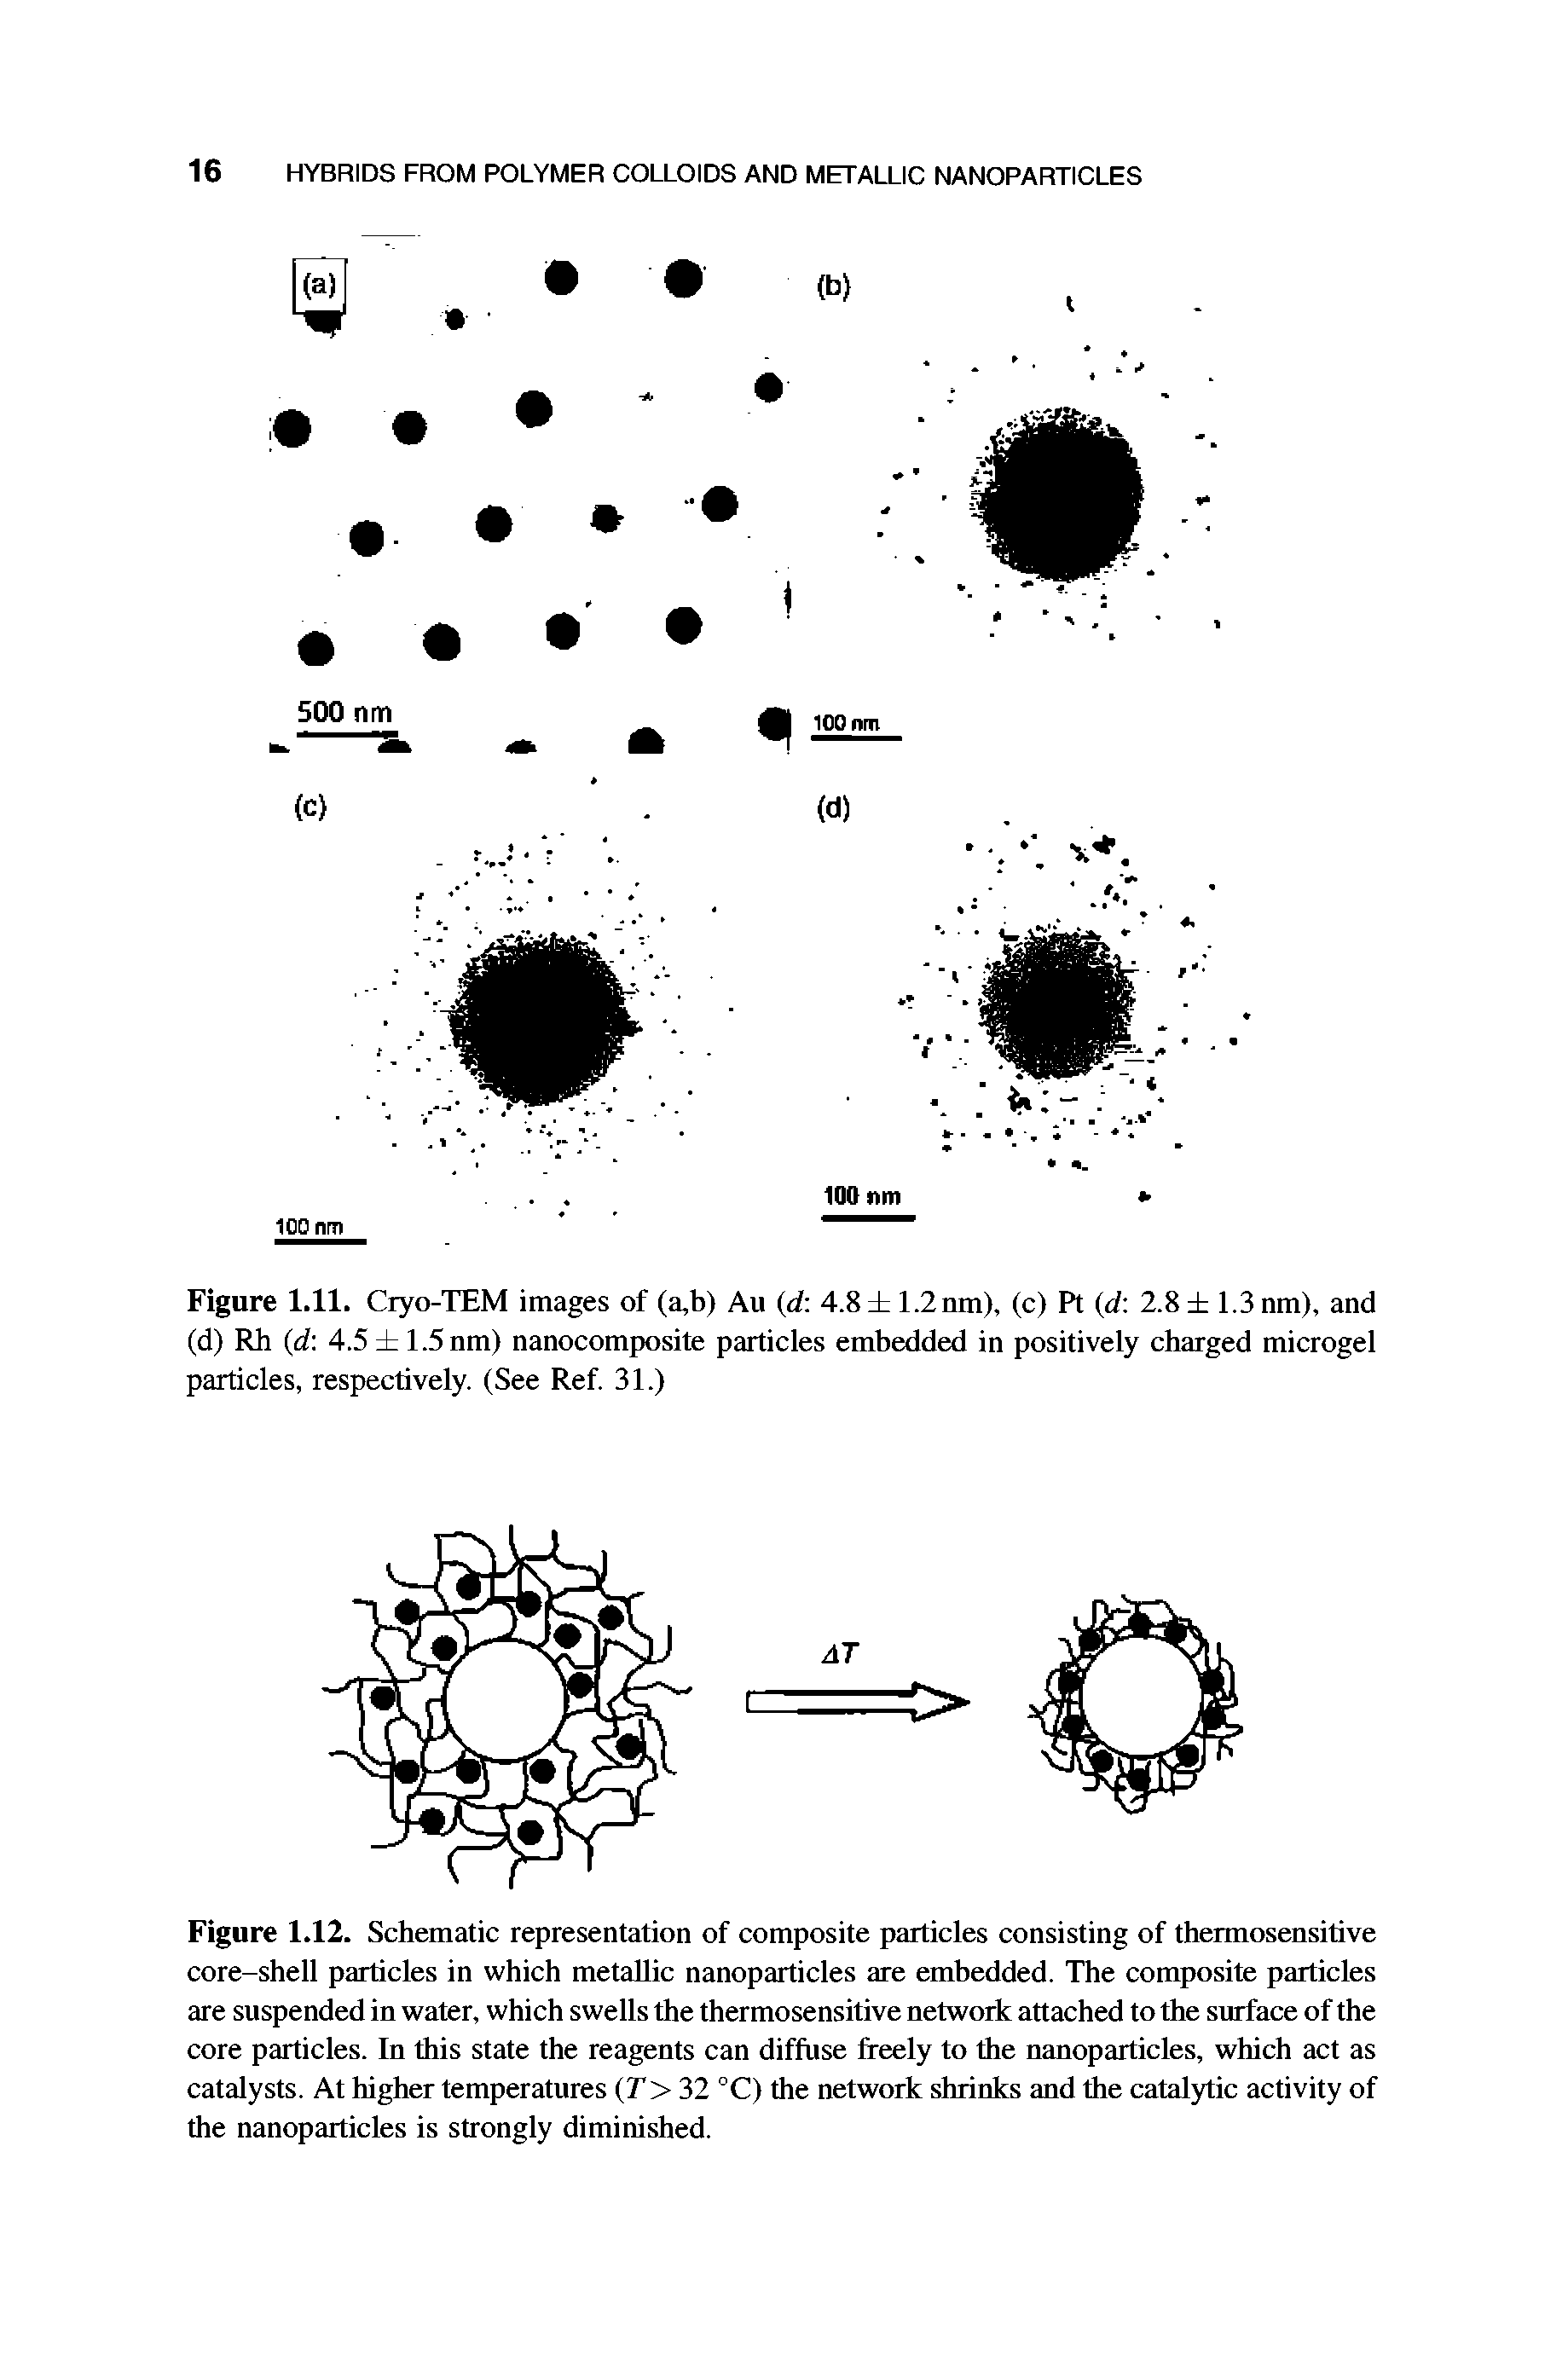 Figure 1.12. Schematic representation of composite particles consisting of thermosensitive core-shell particles in which metallic nanoparticles are embedded. The composite particles are suspended in water, which swells the thermosensitive network attached to the surface of the core particles. In this state the reagents can diffuse freely to the nanoparticles, which act as catalysts. At higher temperatures (T> 32 °C) the network shrinks and the catalytic activity of the nanoparticles is strongly diminished.